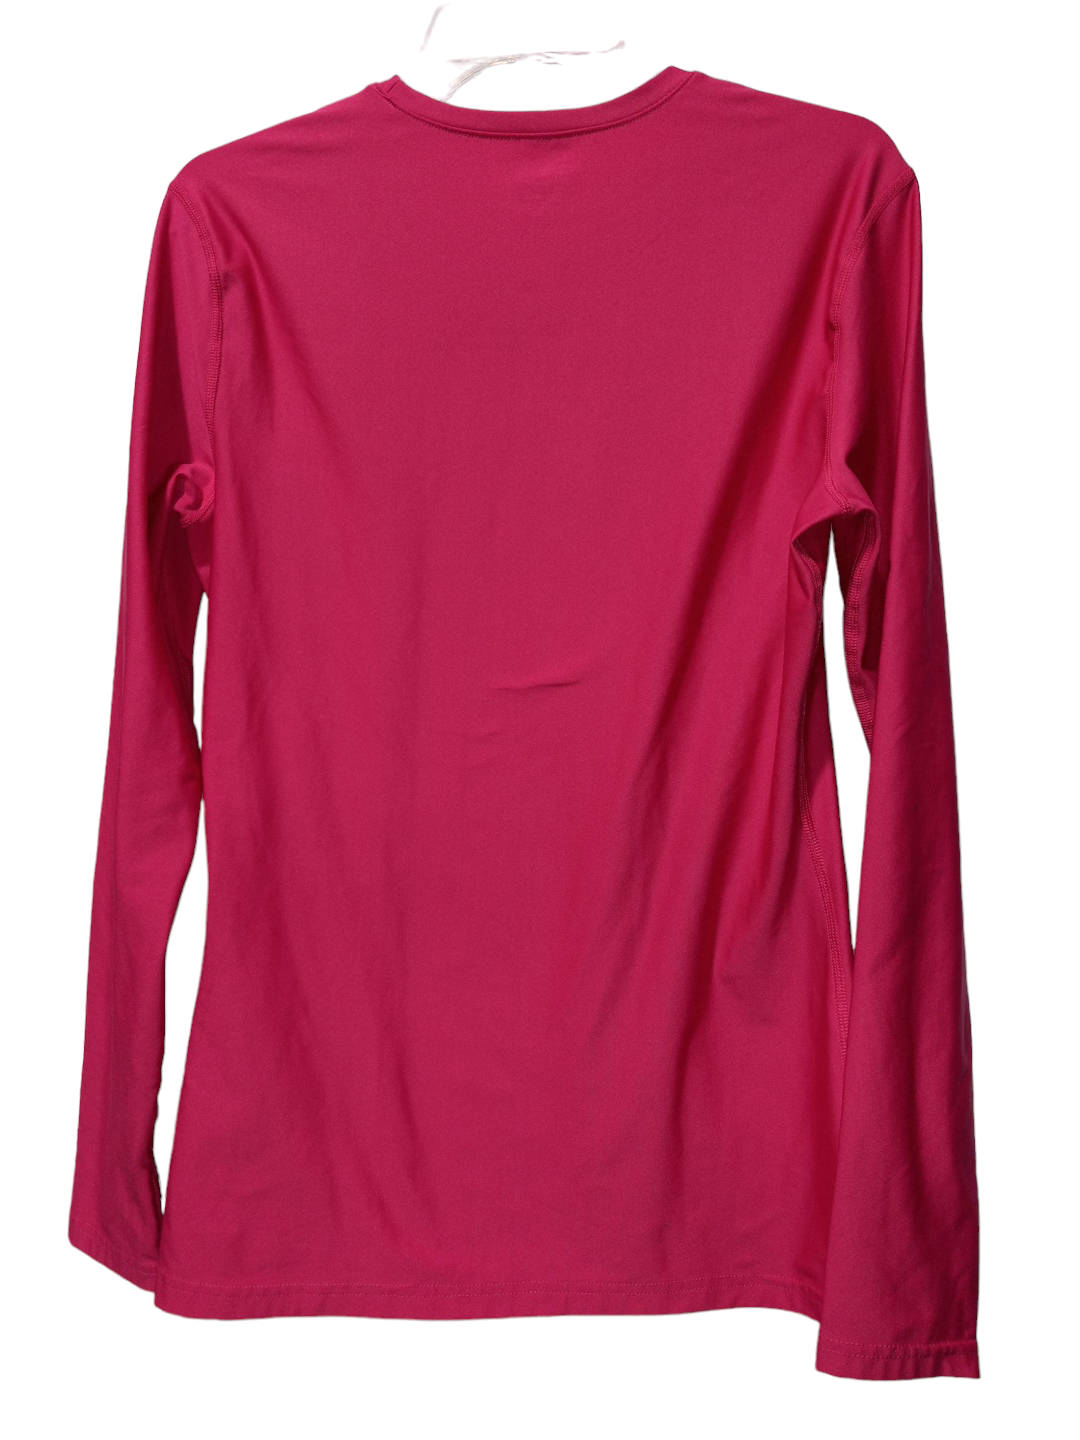 Pink Athletic Top Long Sleeve Collar Bcg, Size Xl